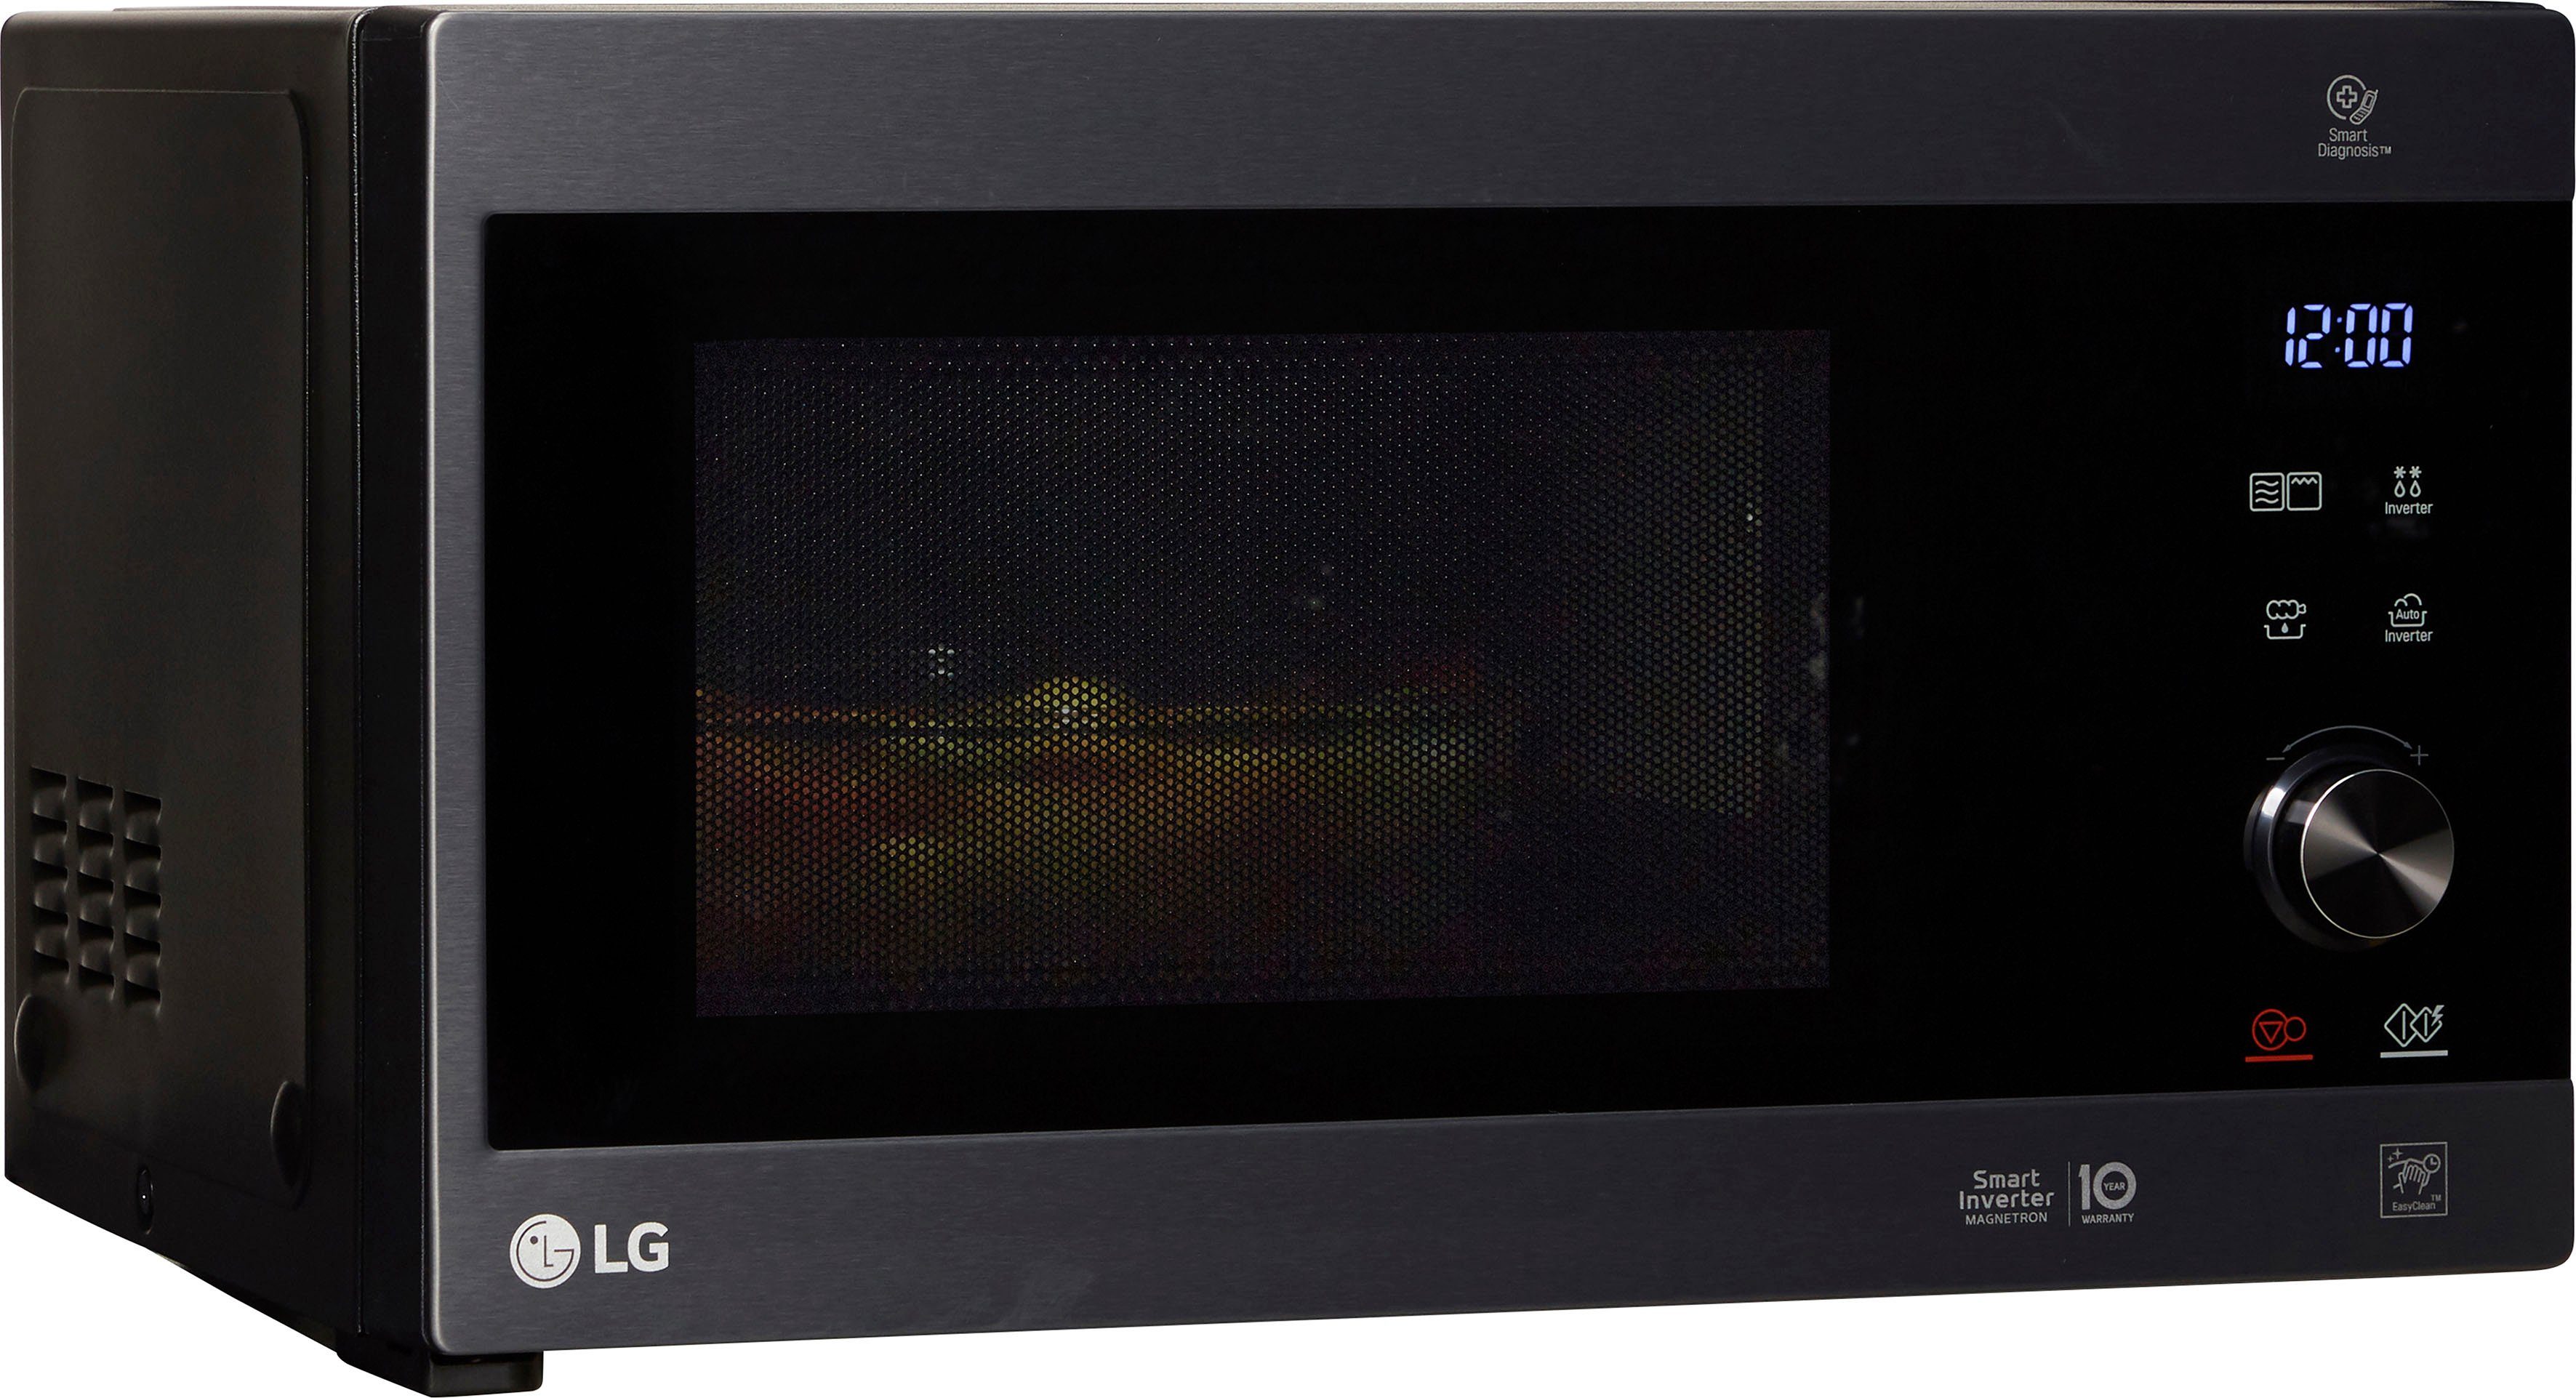 LG Mikrowelle MH 6565 Mikrowelle, l CPB, 25 Grill